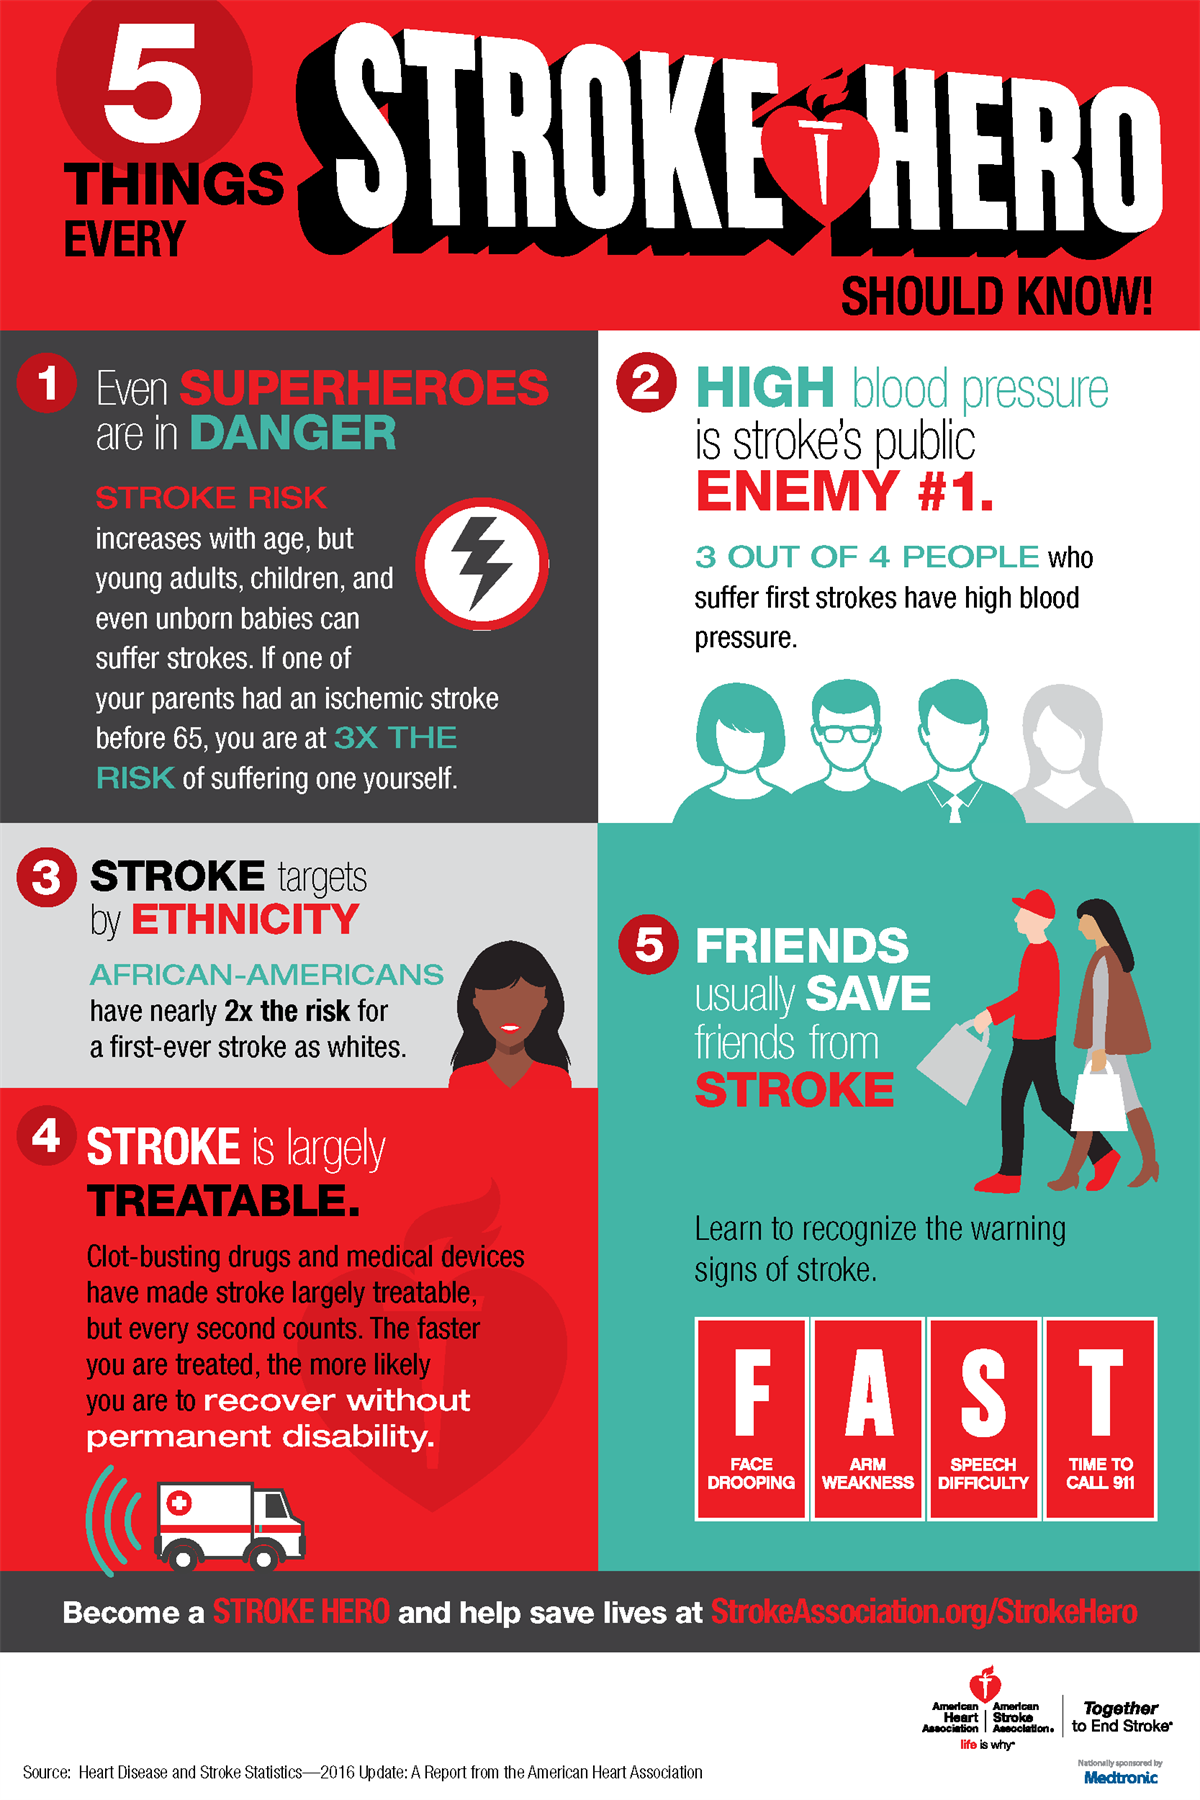 FAST: How to spot a stroke and know when to call 911